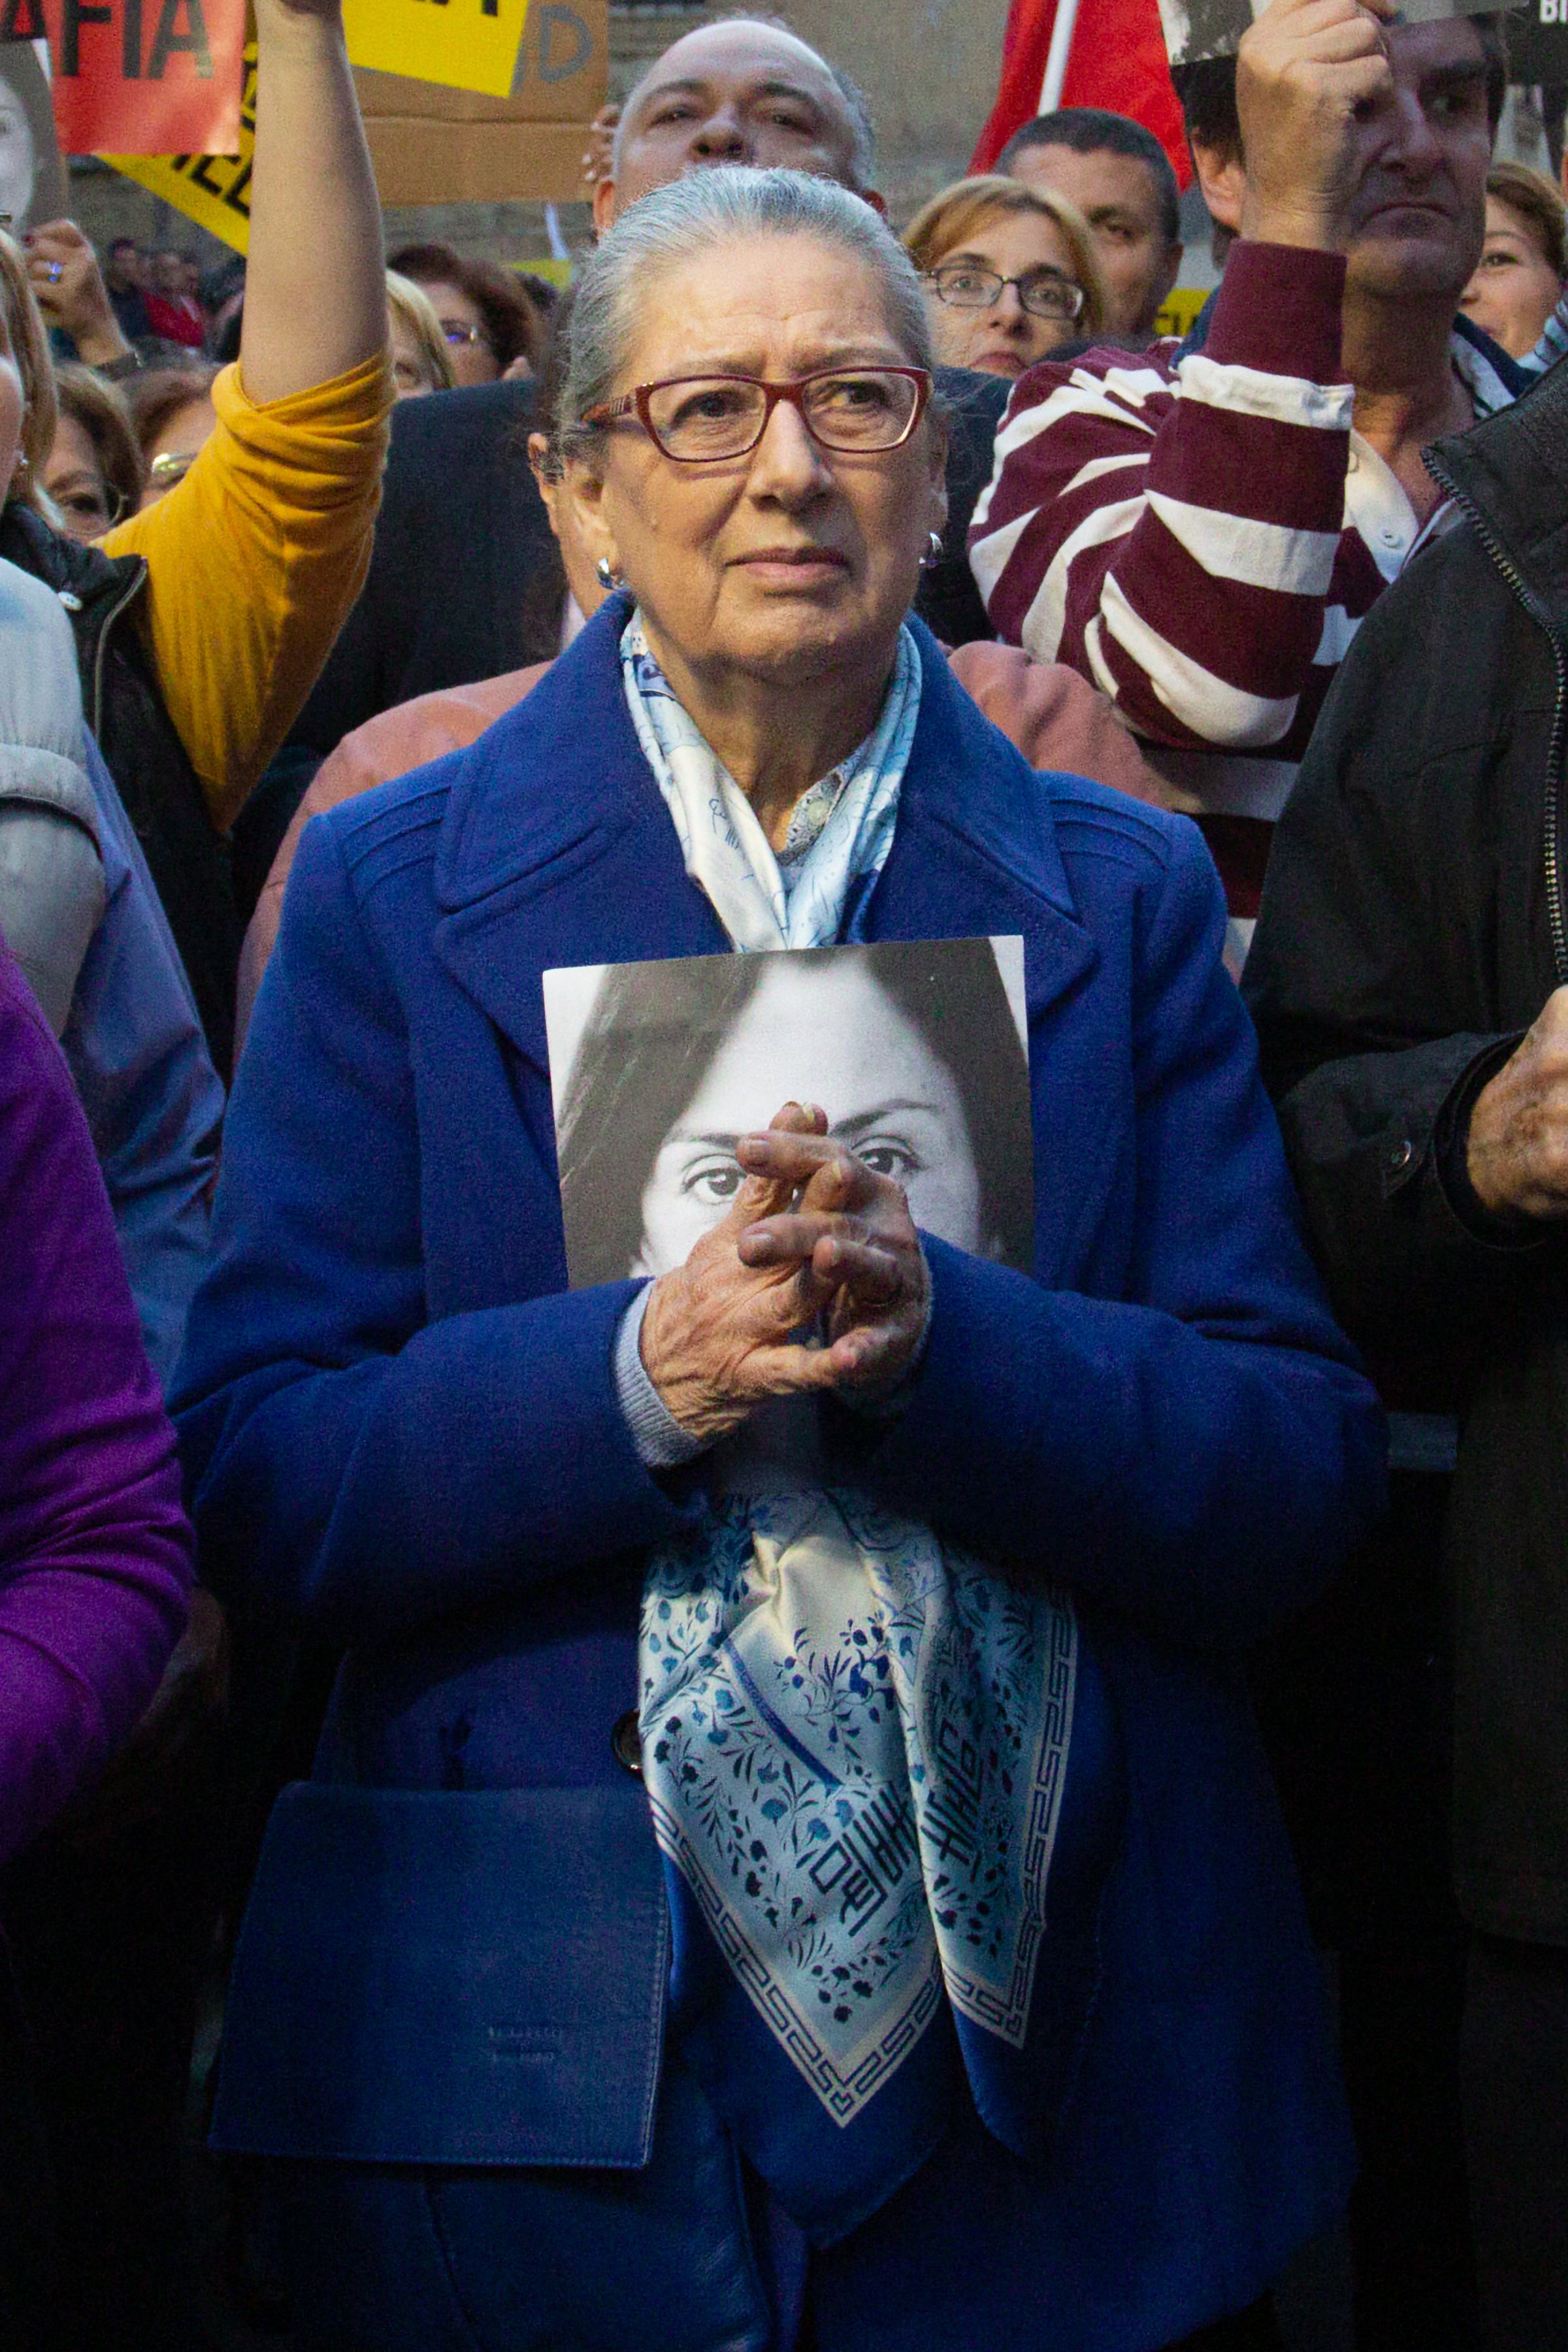 38 - 01 Dec 19 - Mother of DCG with Protesters Gathering in Front of Court Demanding DCG Justice.jpg